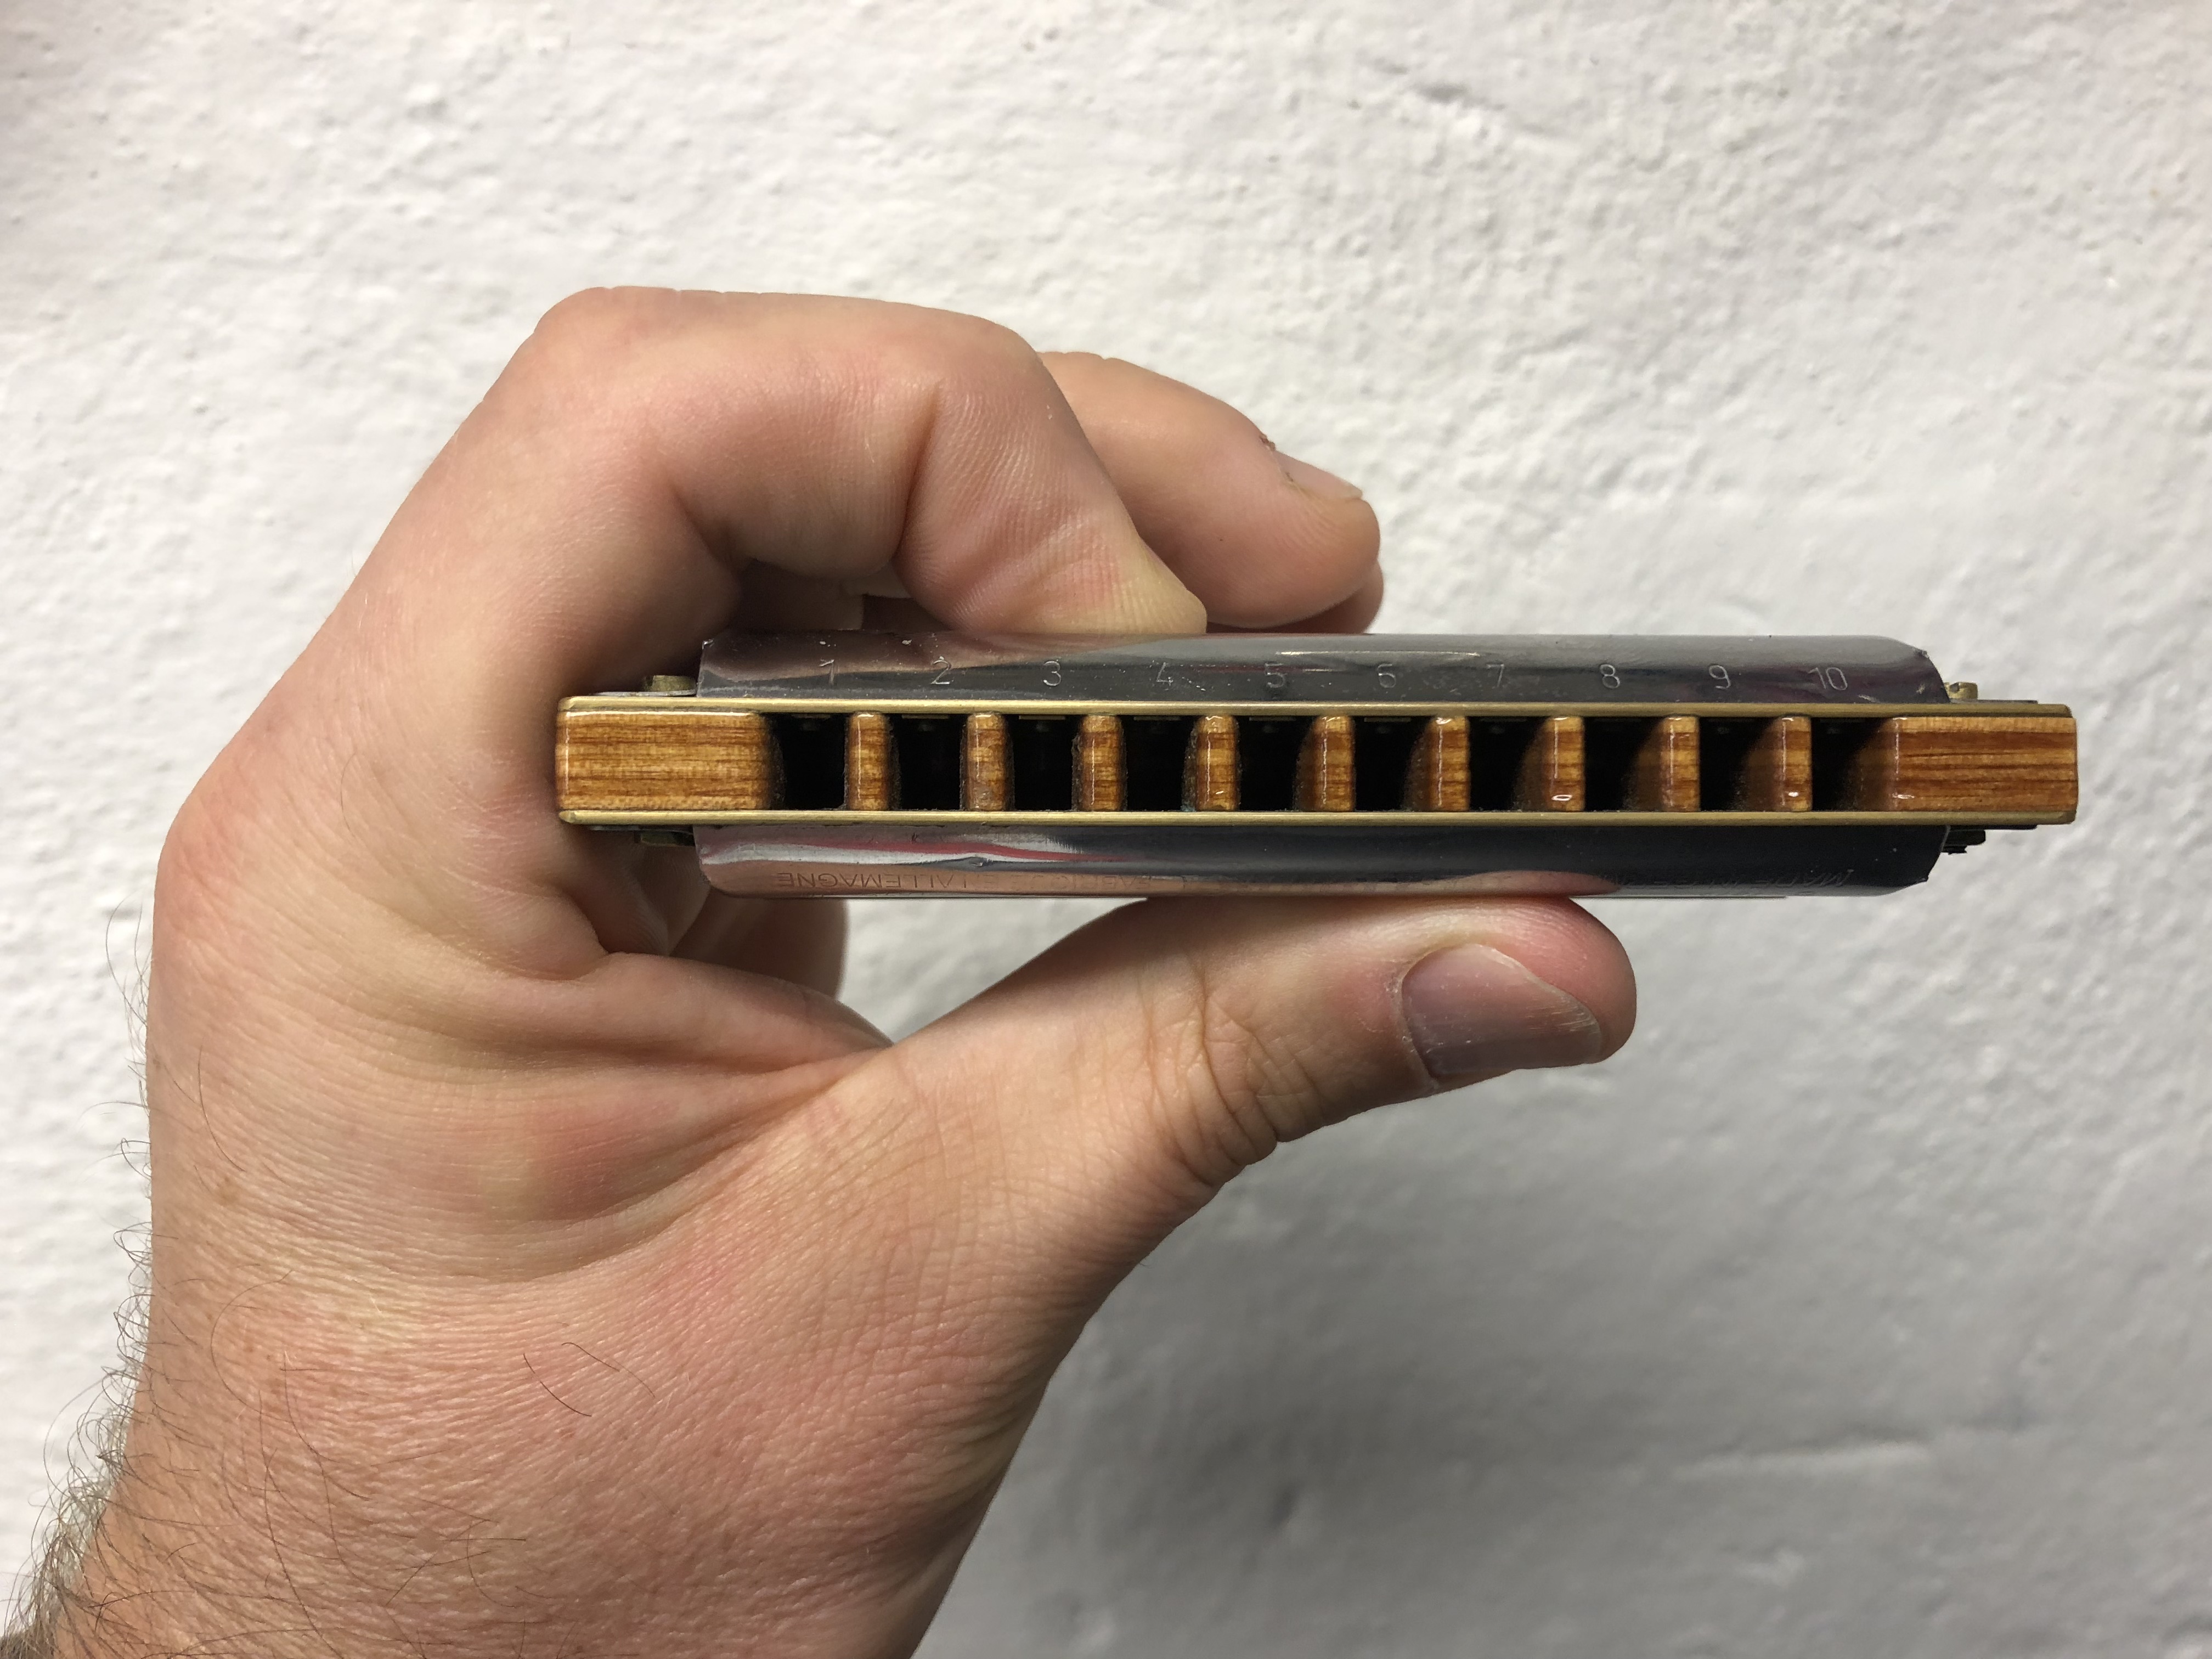 How Does The Harmonica Work?